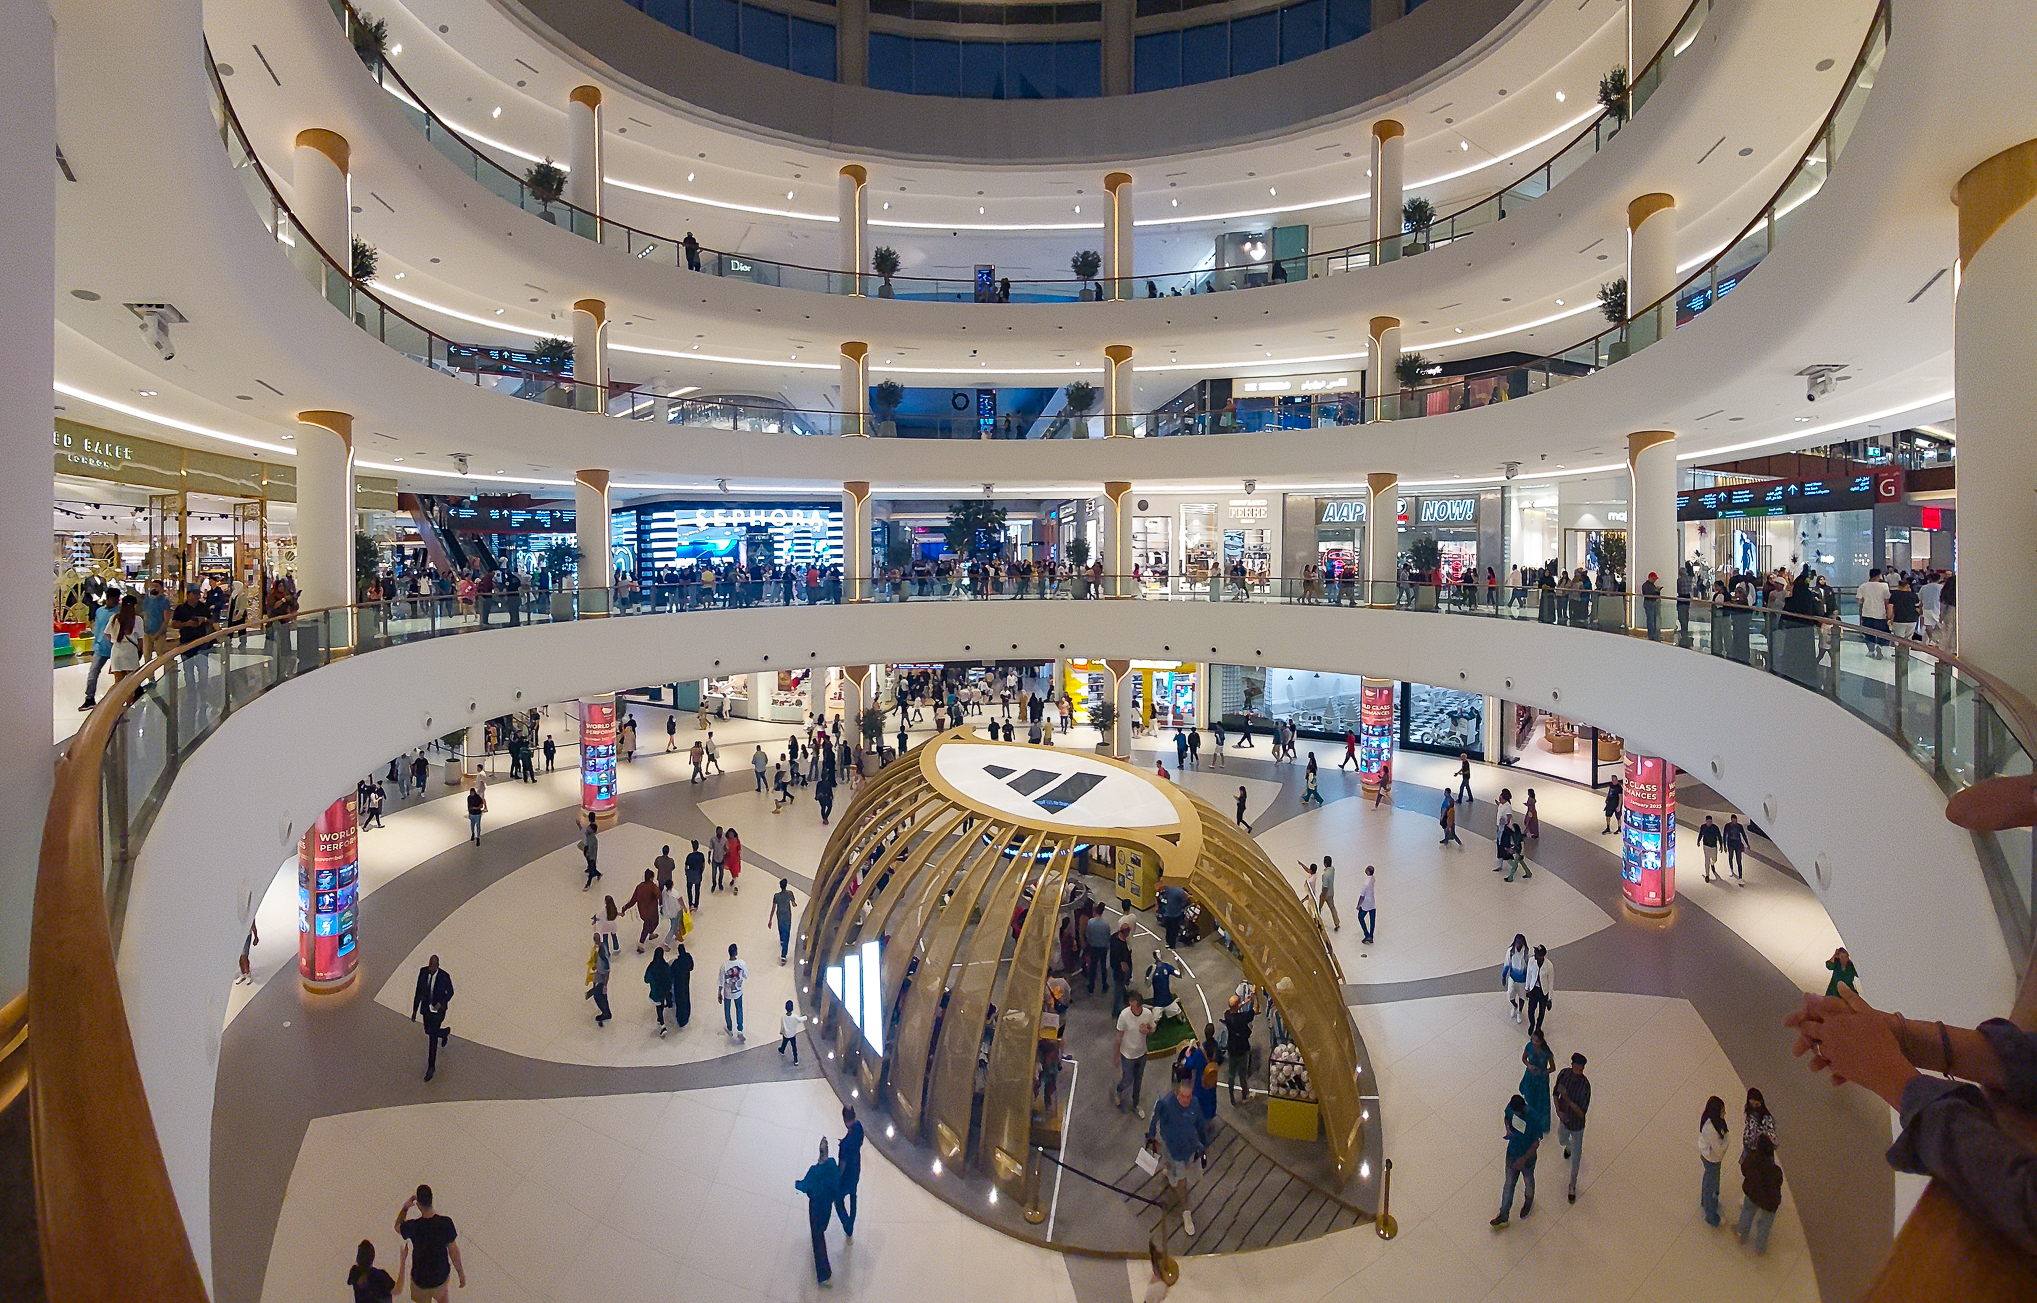 <span  class="uc_style_uc_tiles_grid_image_elementor_uc_items_attribute_title" style="color:#ffffff;">Dubai also stands for 'Shopping Centers' (many of them, nice if you to cool down)</span>